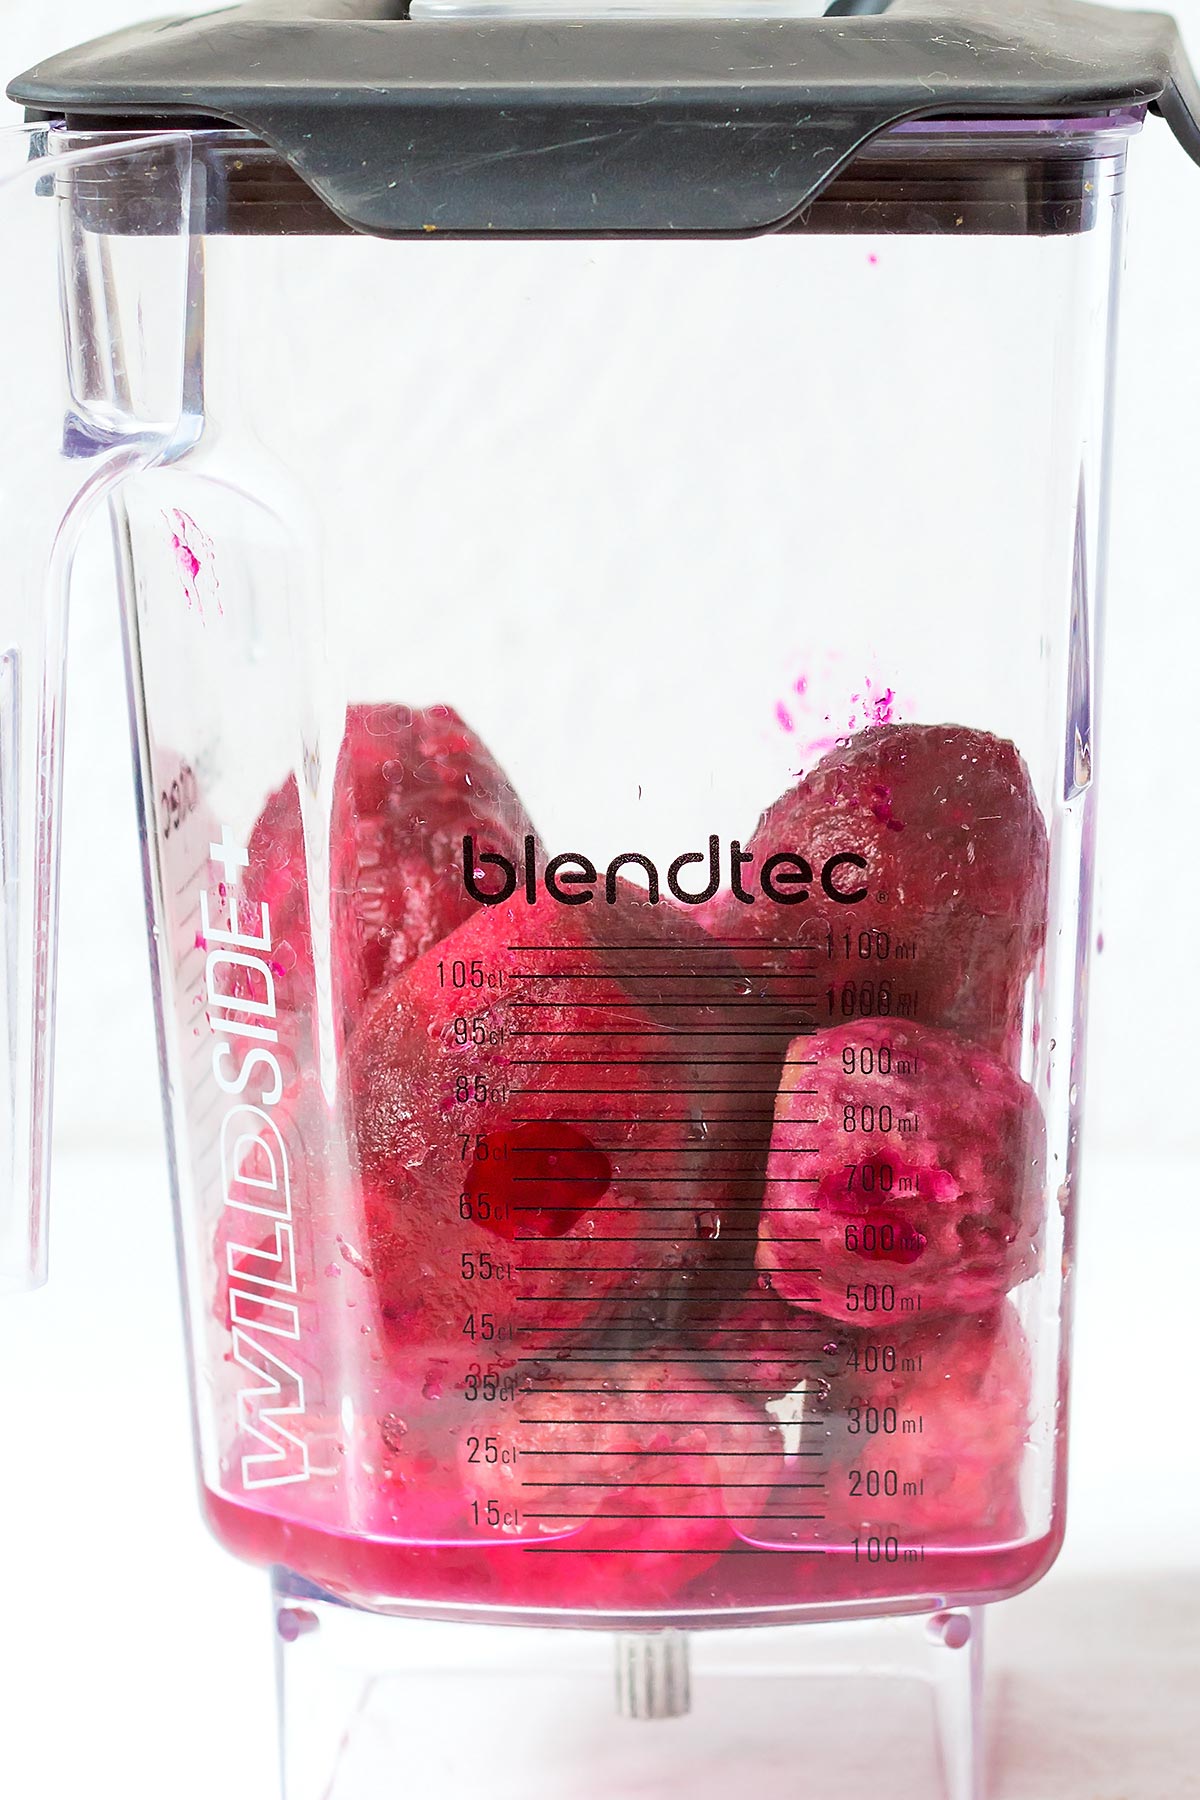 Blender with prickly pears